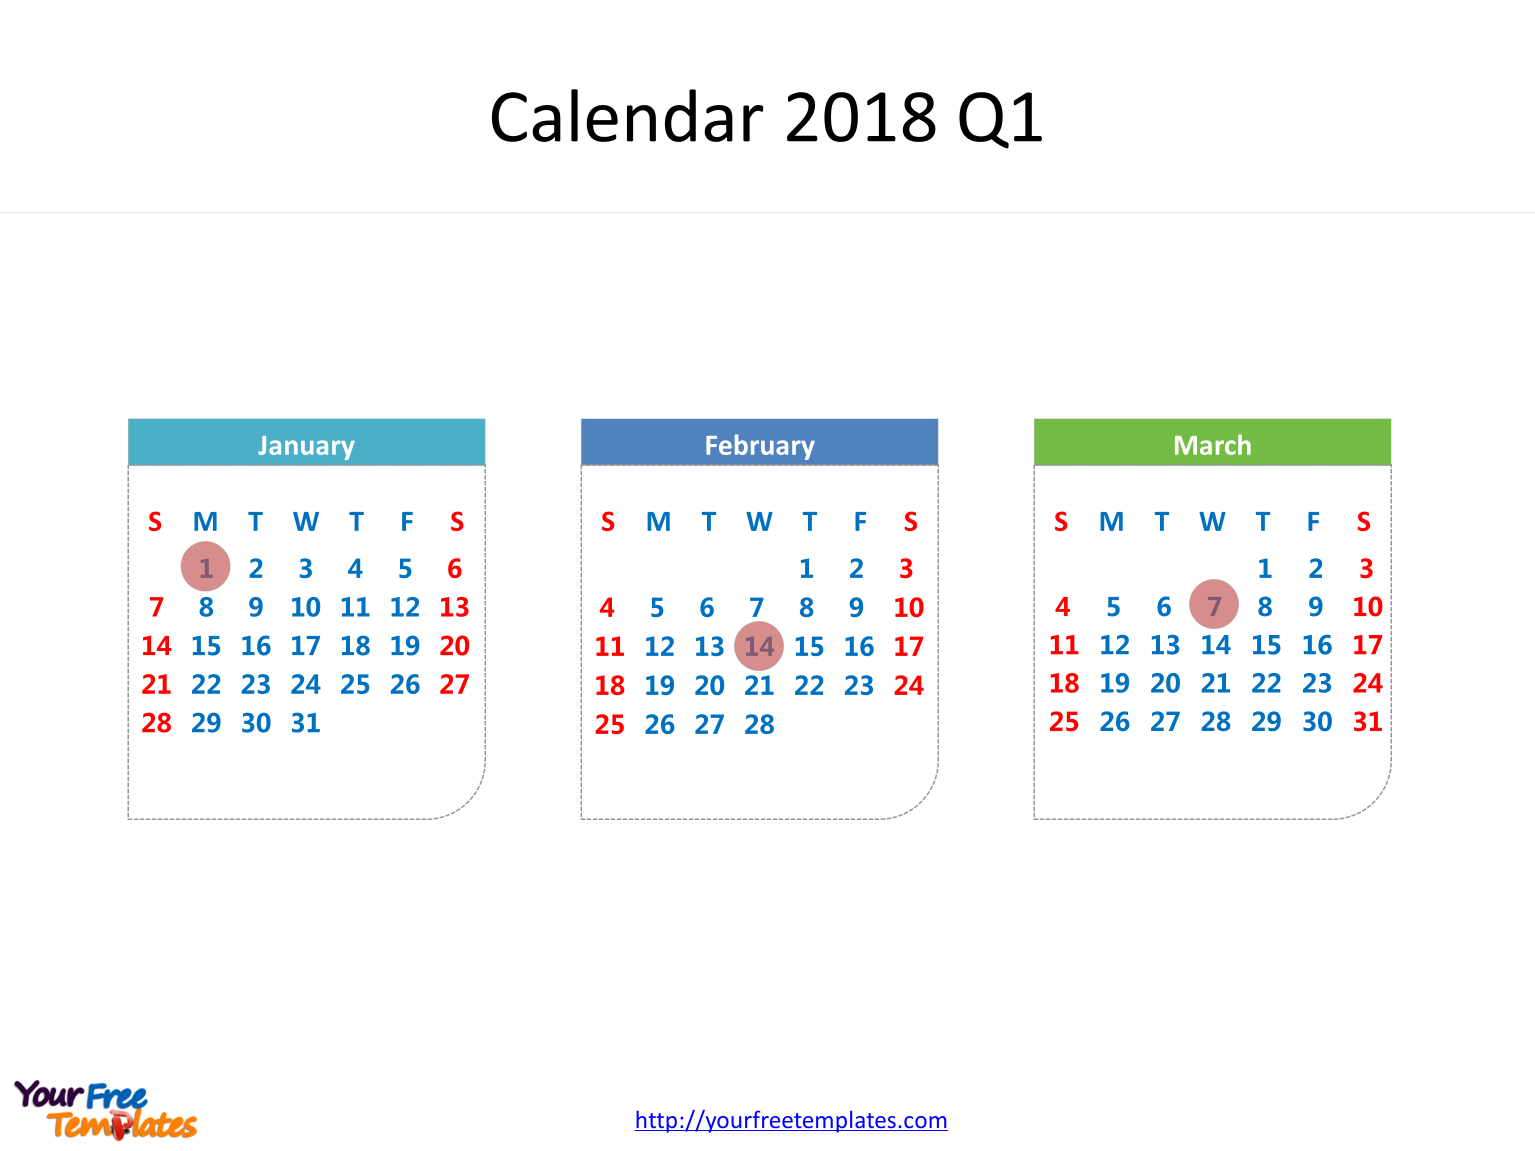 calendar 2018 with dates of three months in it